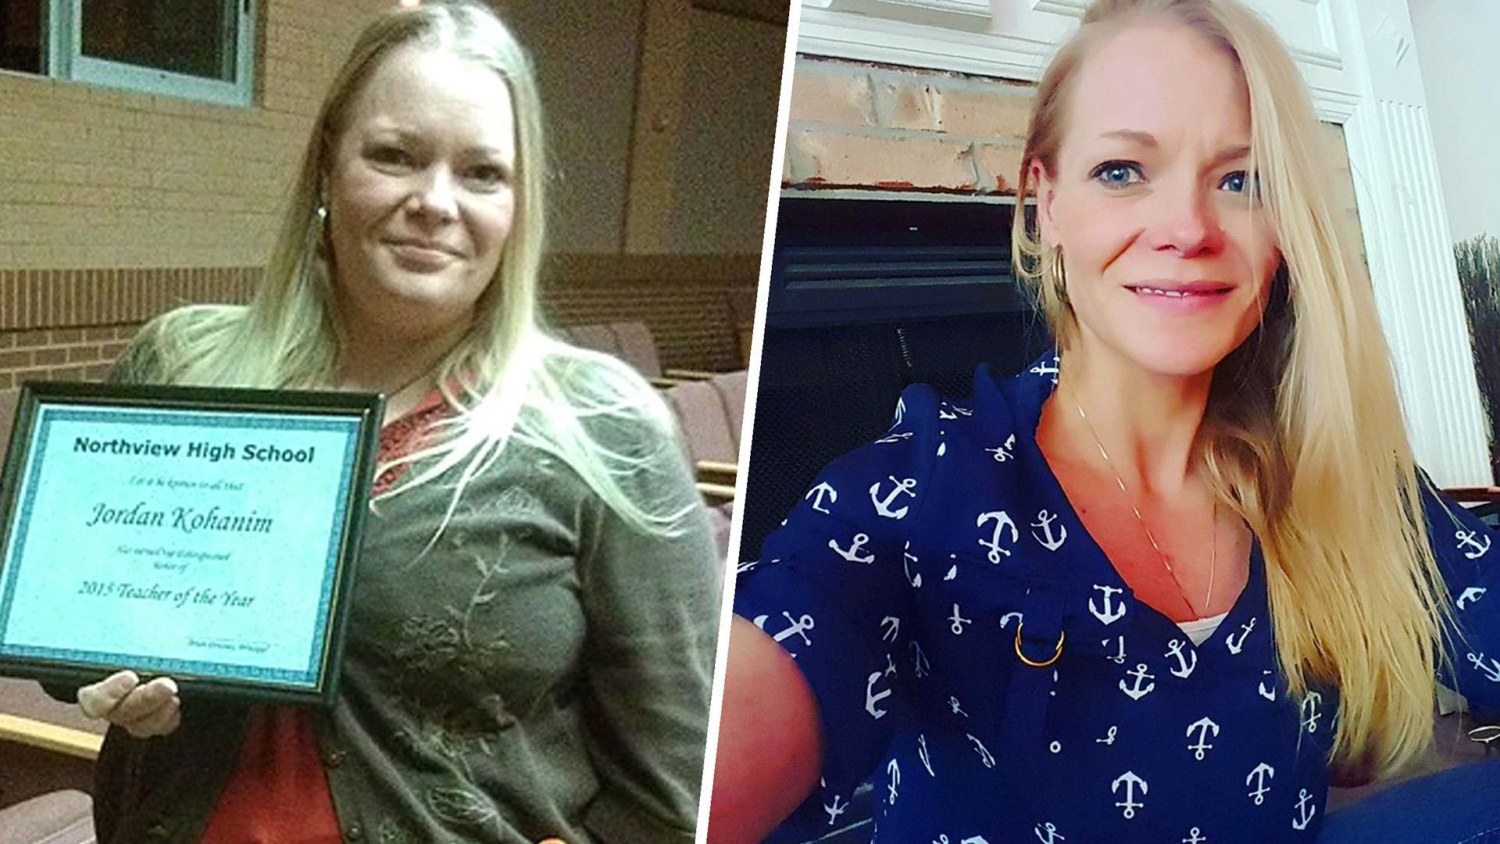 5 steps helped this woman lose 70 pounds in 2 years